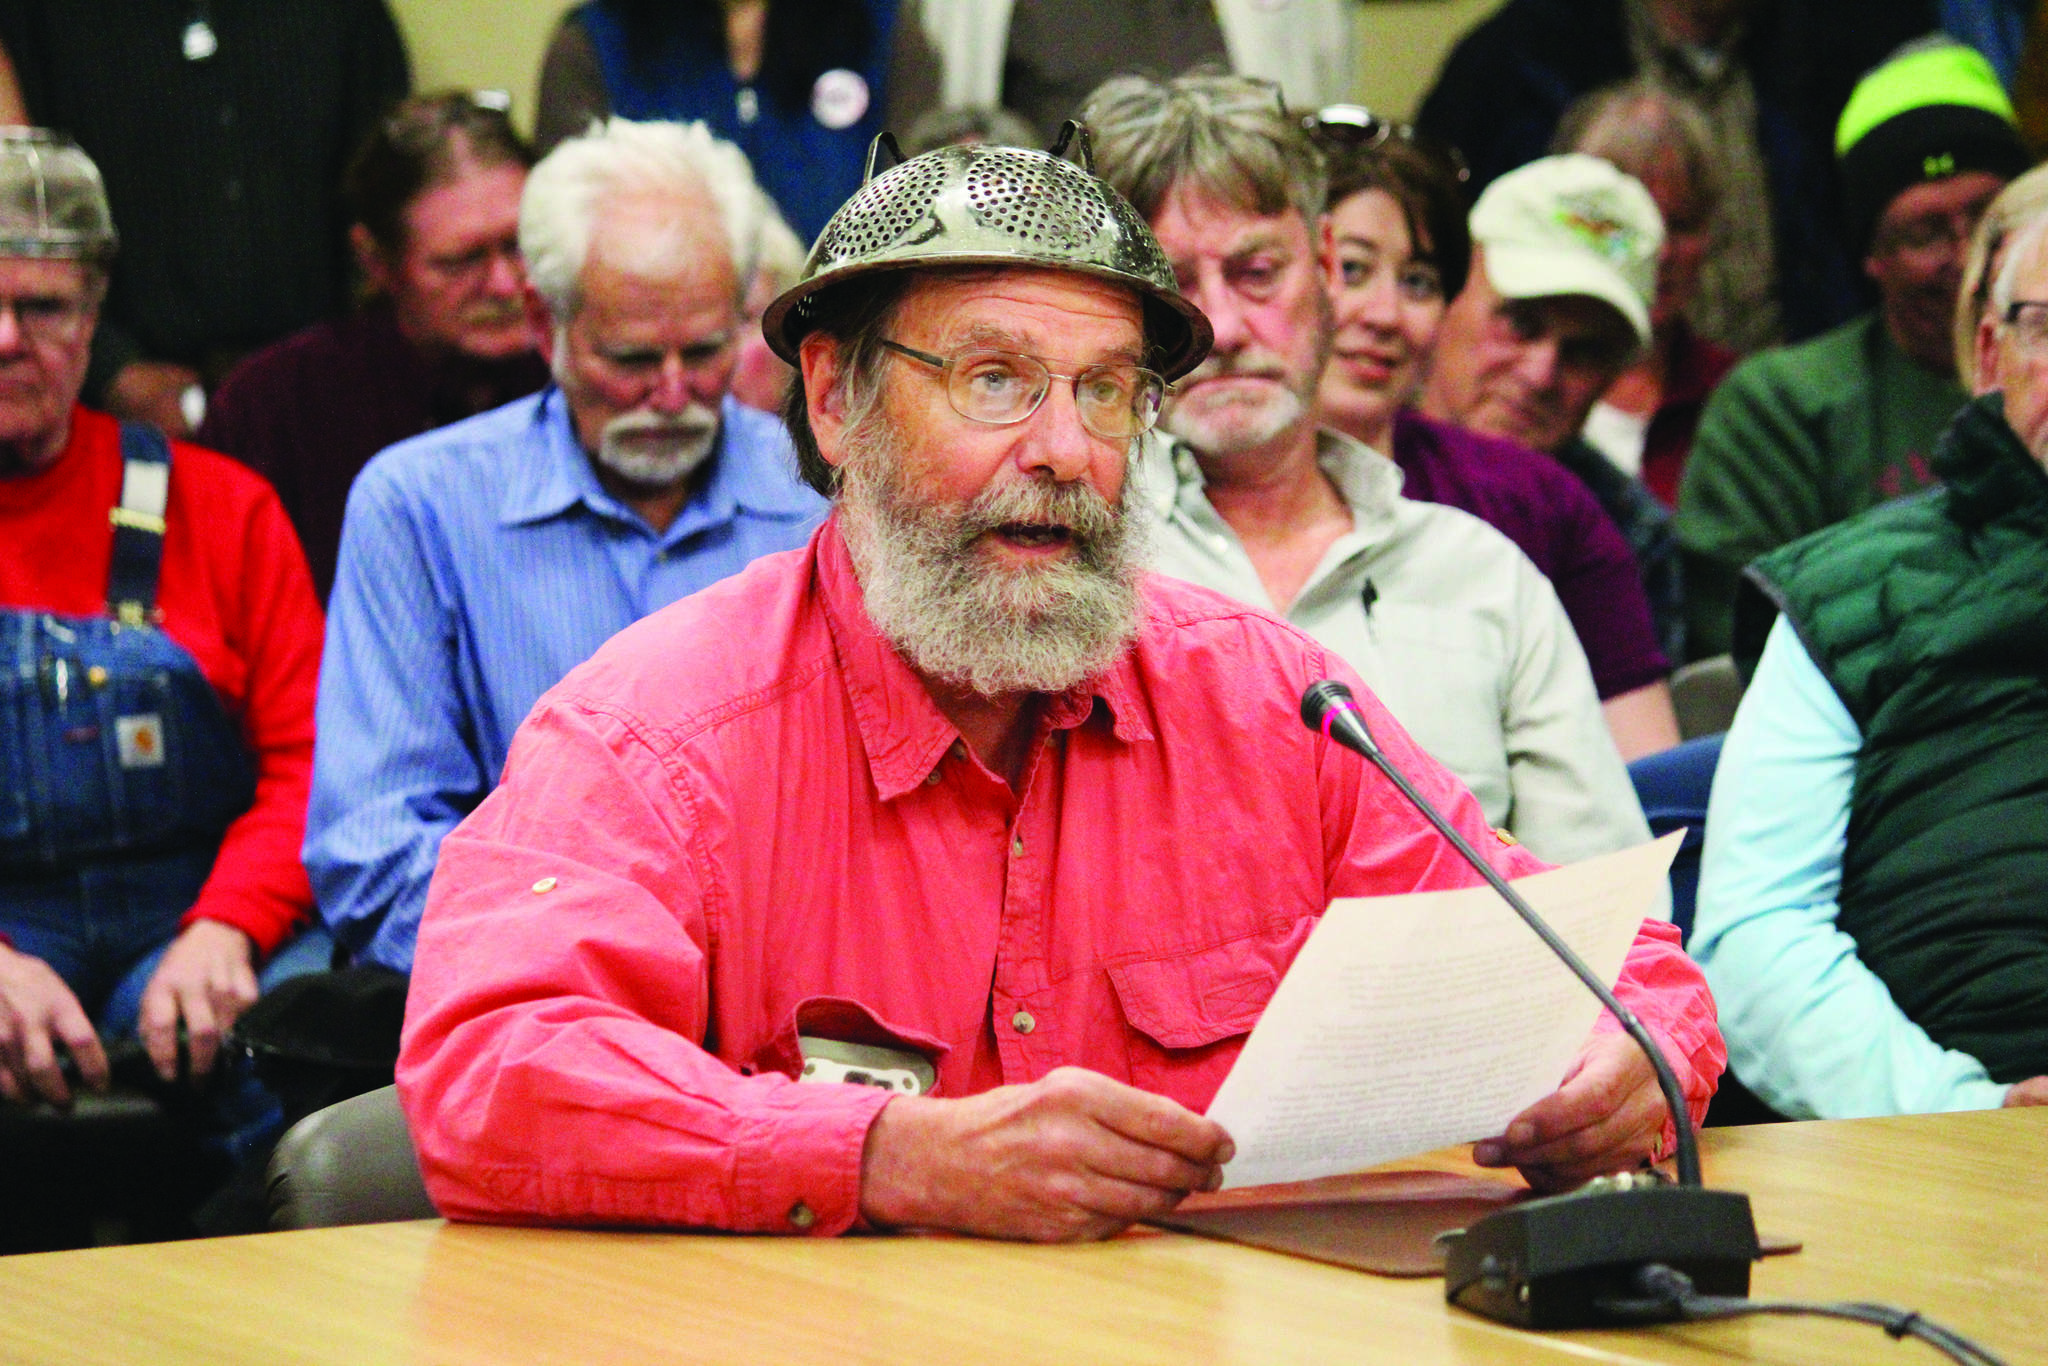 Frtiz Creek area resident Barrett Fletcher gives the invocation before a Tuesday, Sept. 17 2019 Kenai Peninsula Borough Assembly meeting as a representative of the Church of the Flying Spaghetti Monster at Homer City Hall in Homer, Alaska. (Photo by Megan Pacer/Homer News)